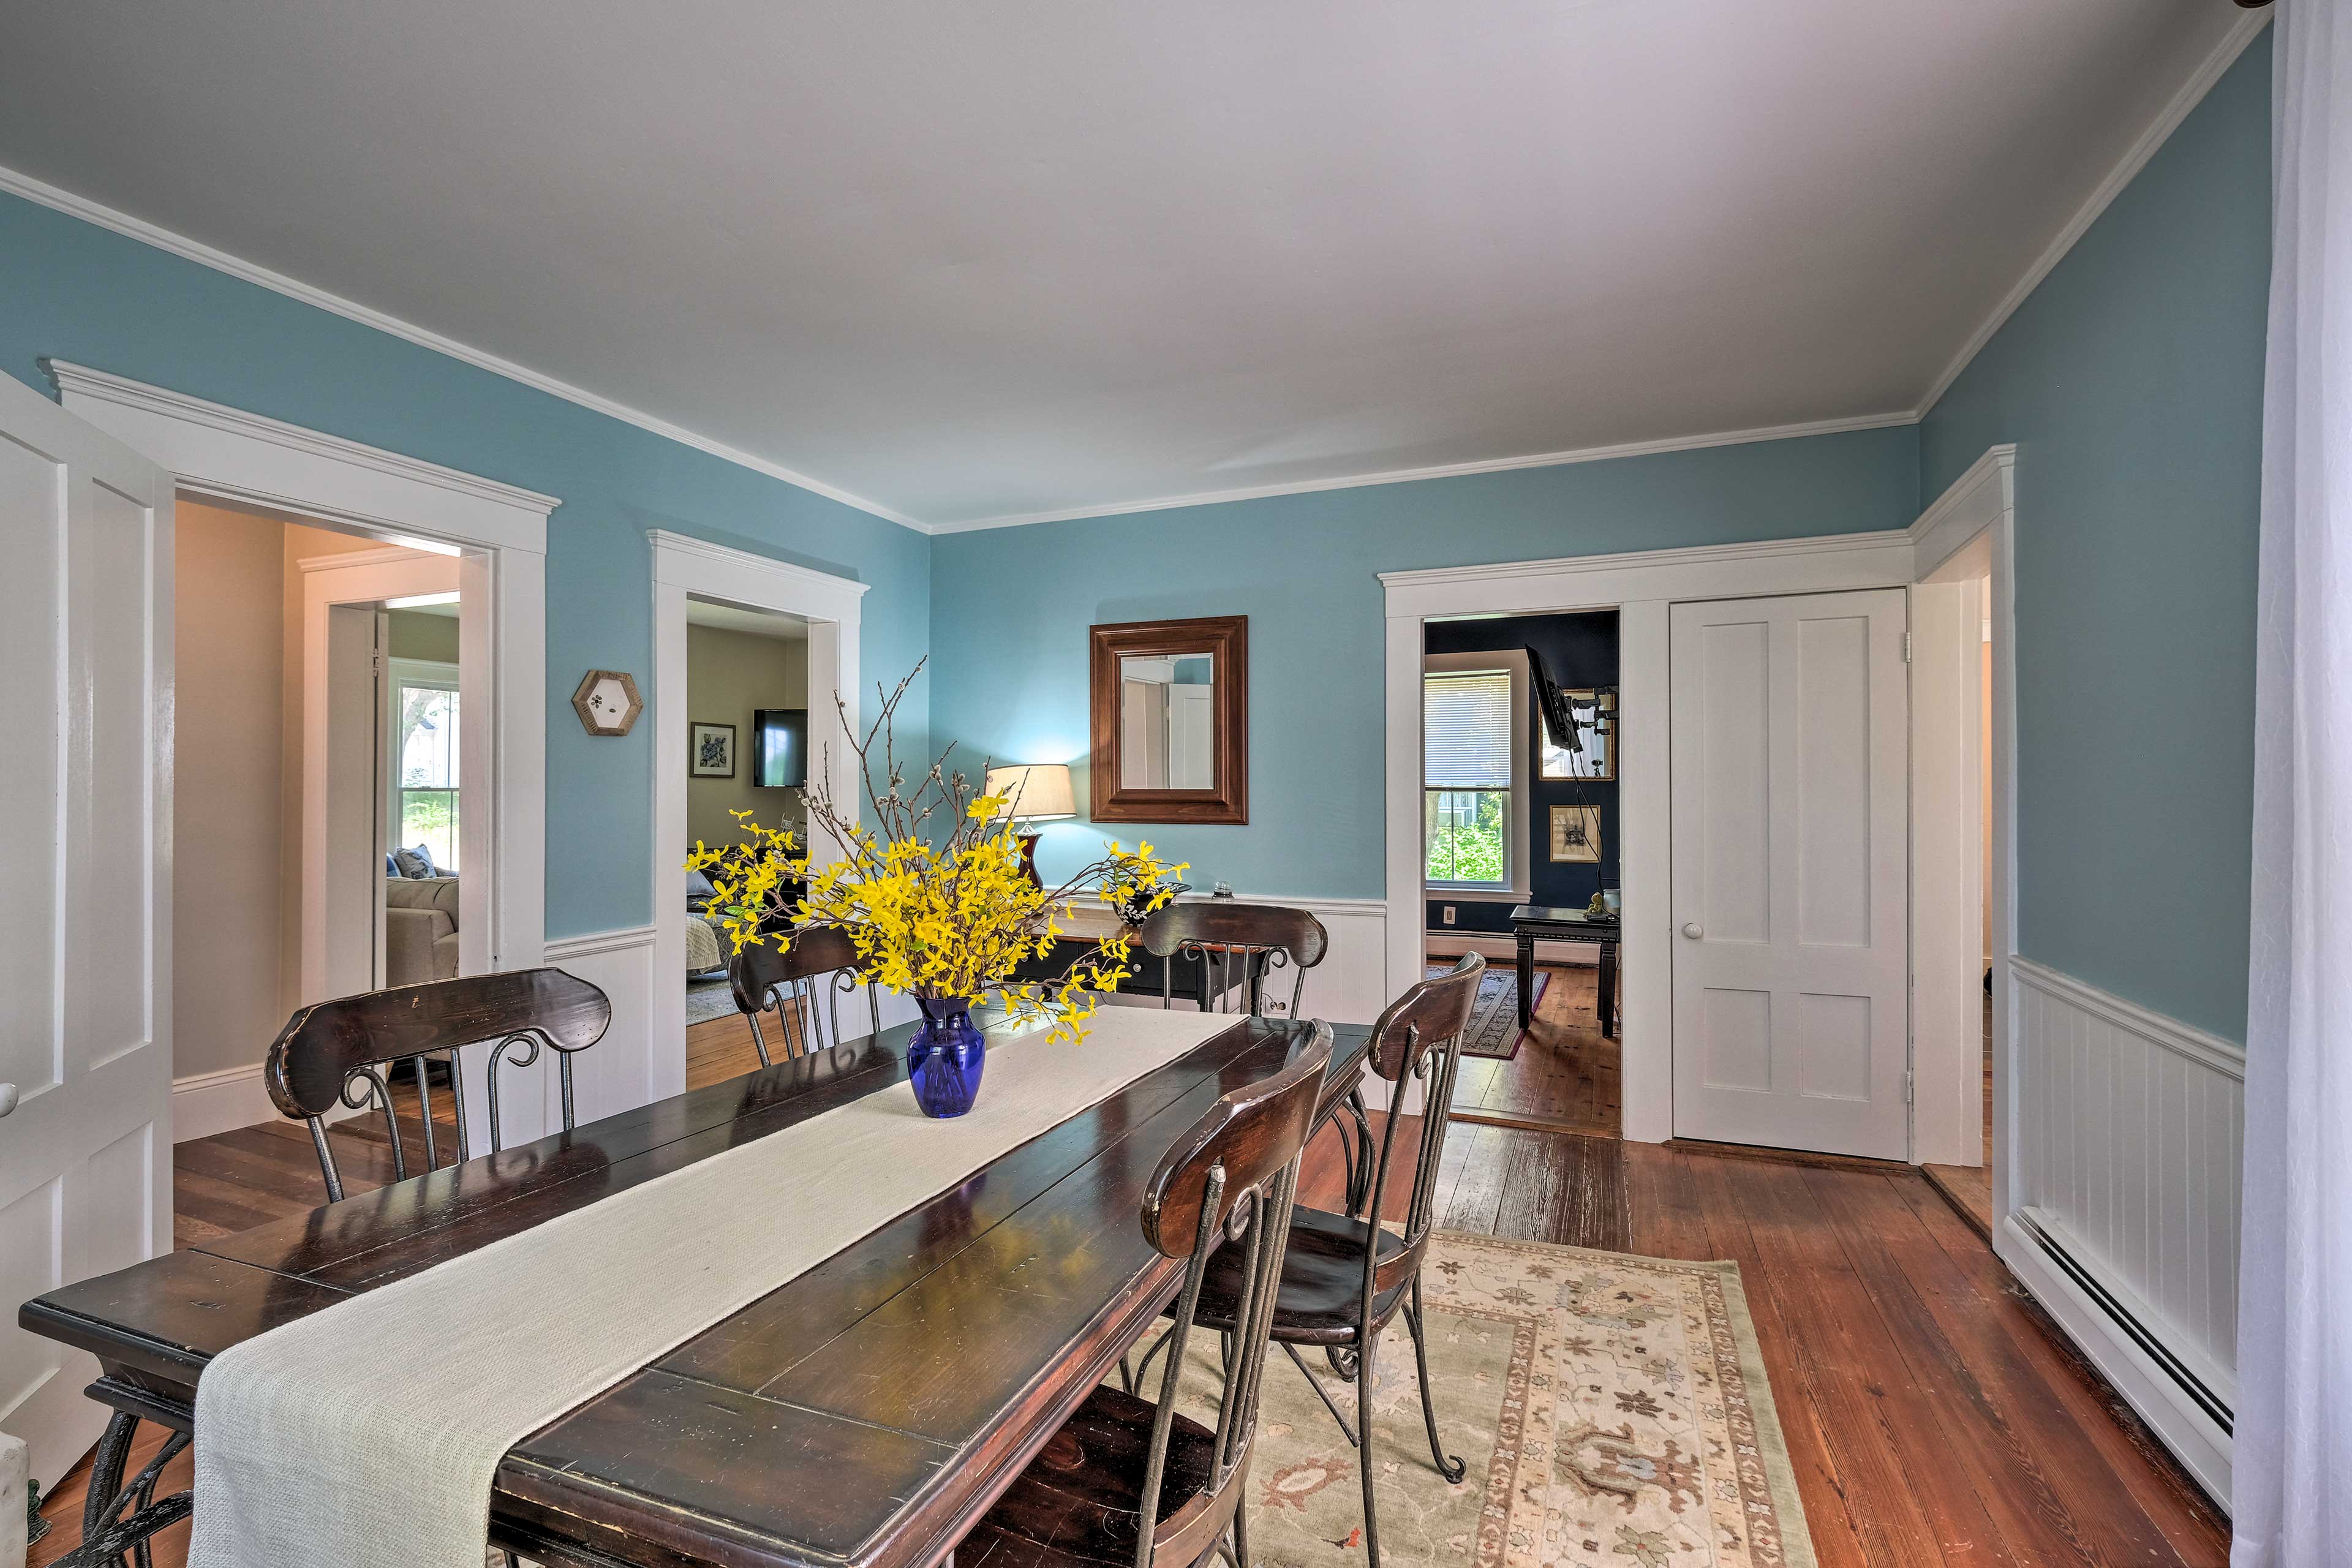 Enjoy home-cooked meals around the formal dining table.